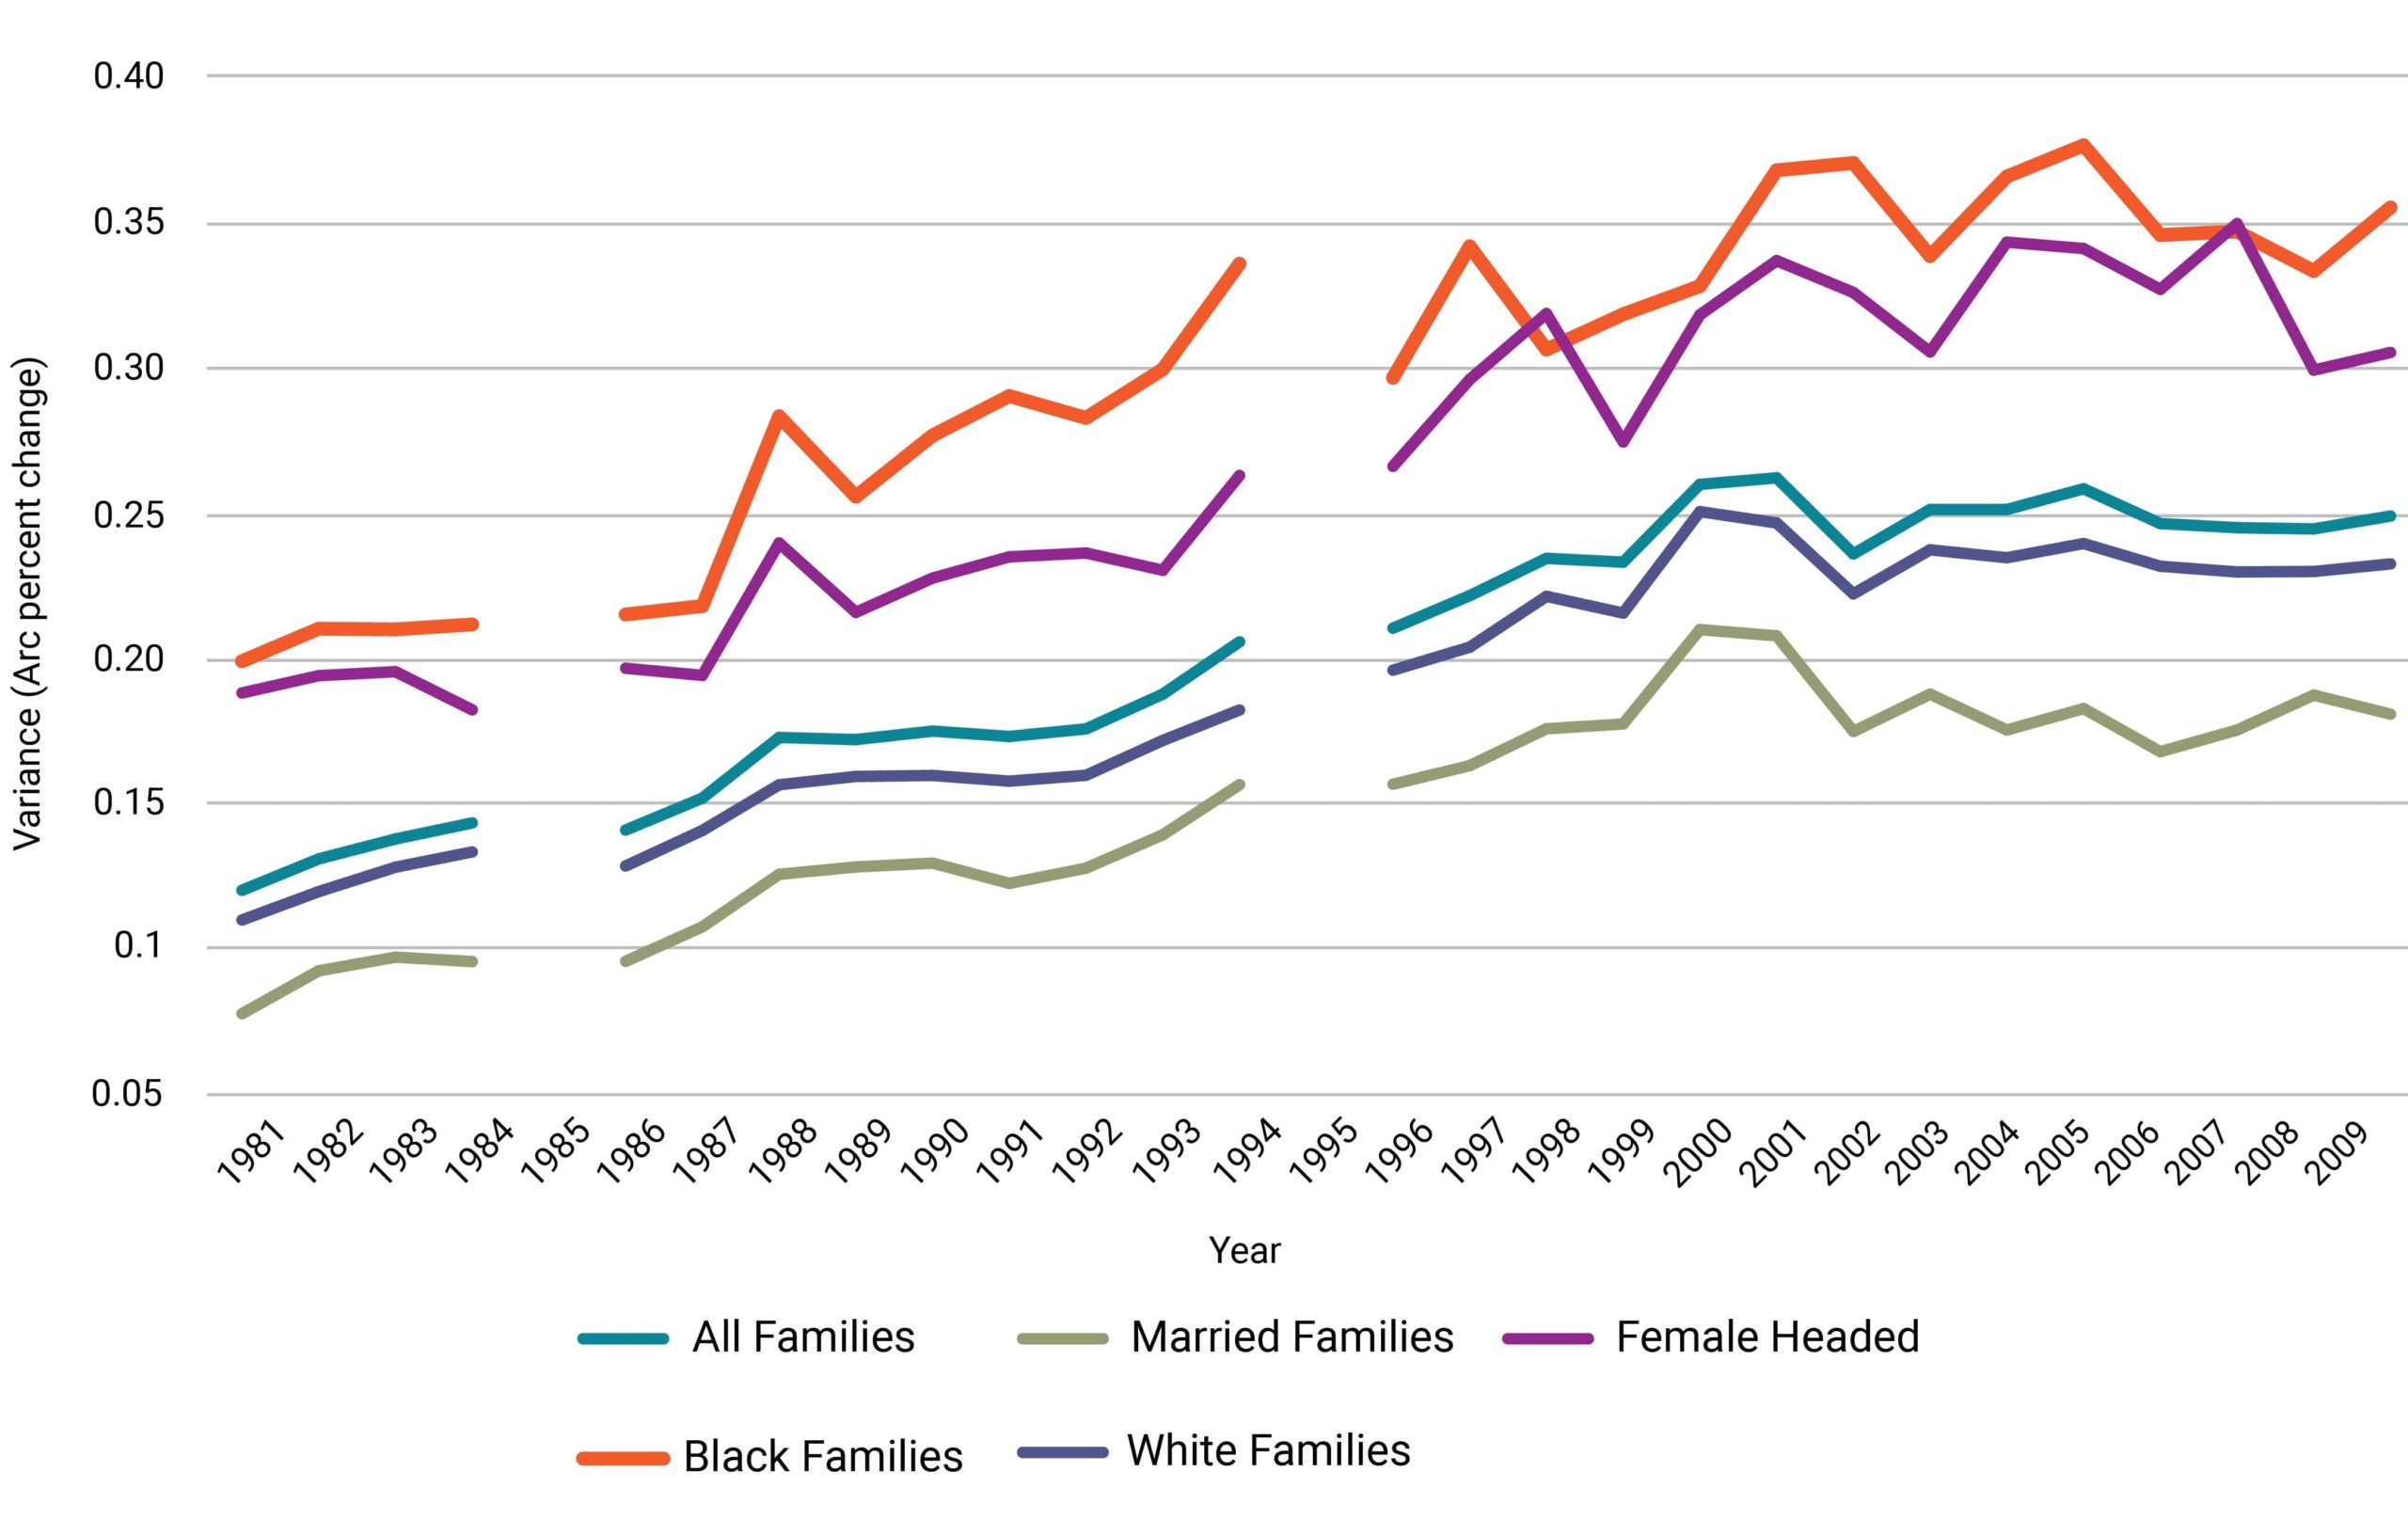 Figure 9. Trends in Disposable Income by Race and Family Structure, 1981-2009